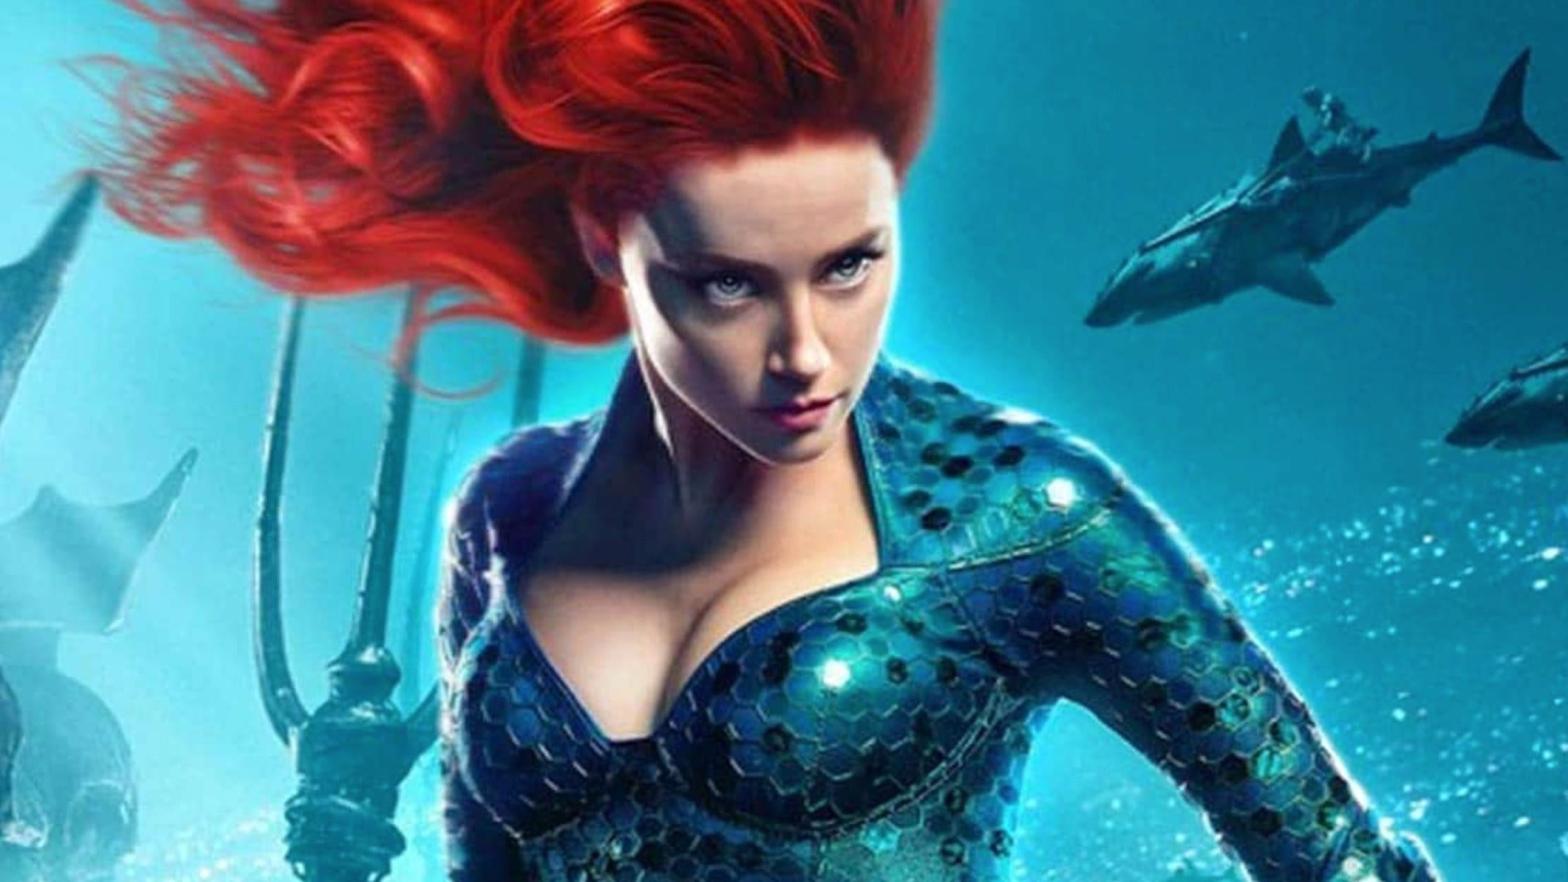 Amber Heard will return as Mera in Aquaman 2, but it will be a smaller role. (Image: Warner Bros.)